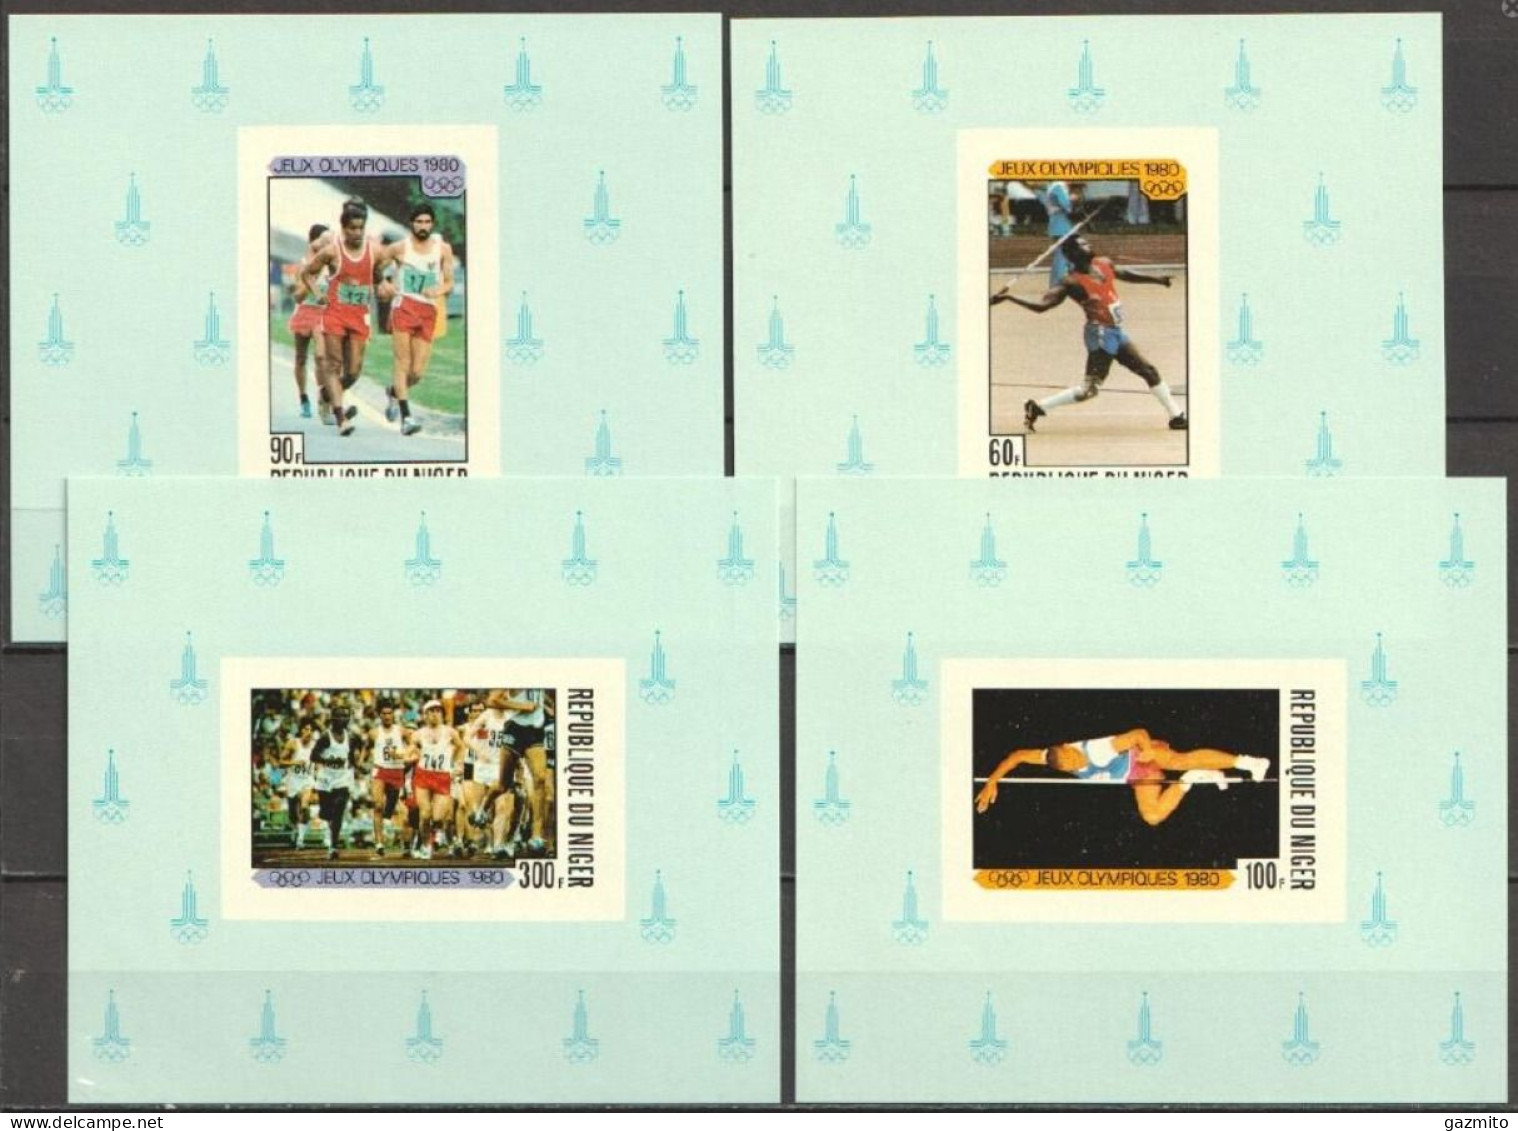 Niger 1980, Olympic Games In Moscow, 4 Proofs - Níger (1960-...)